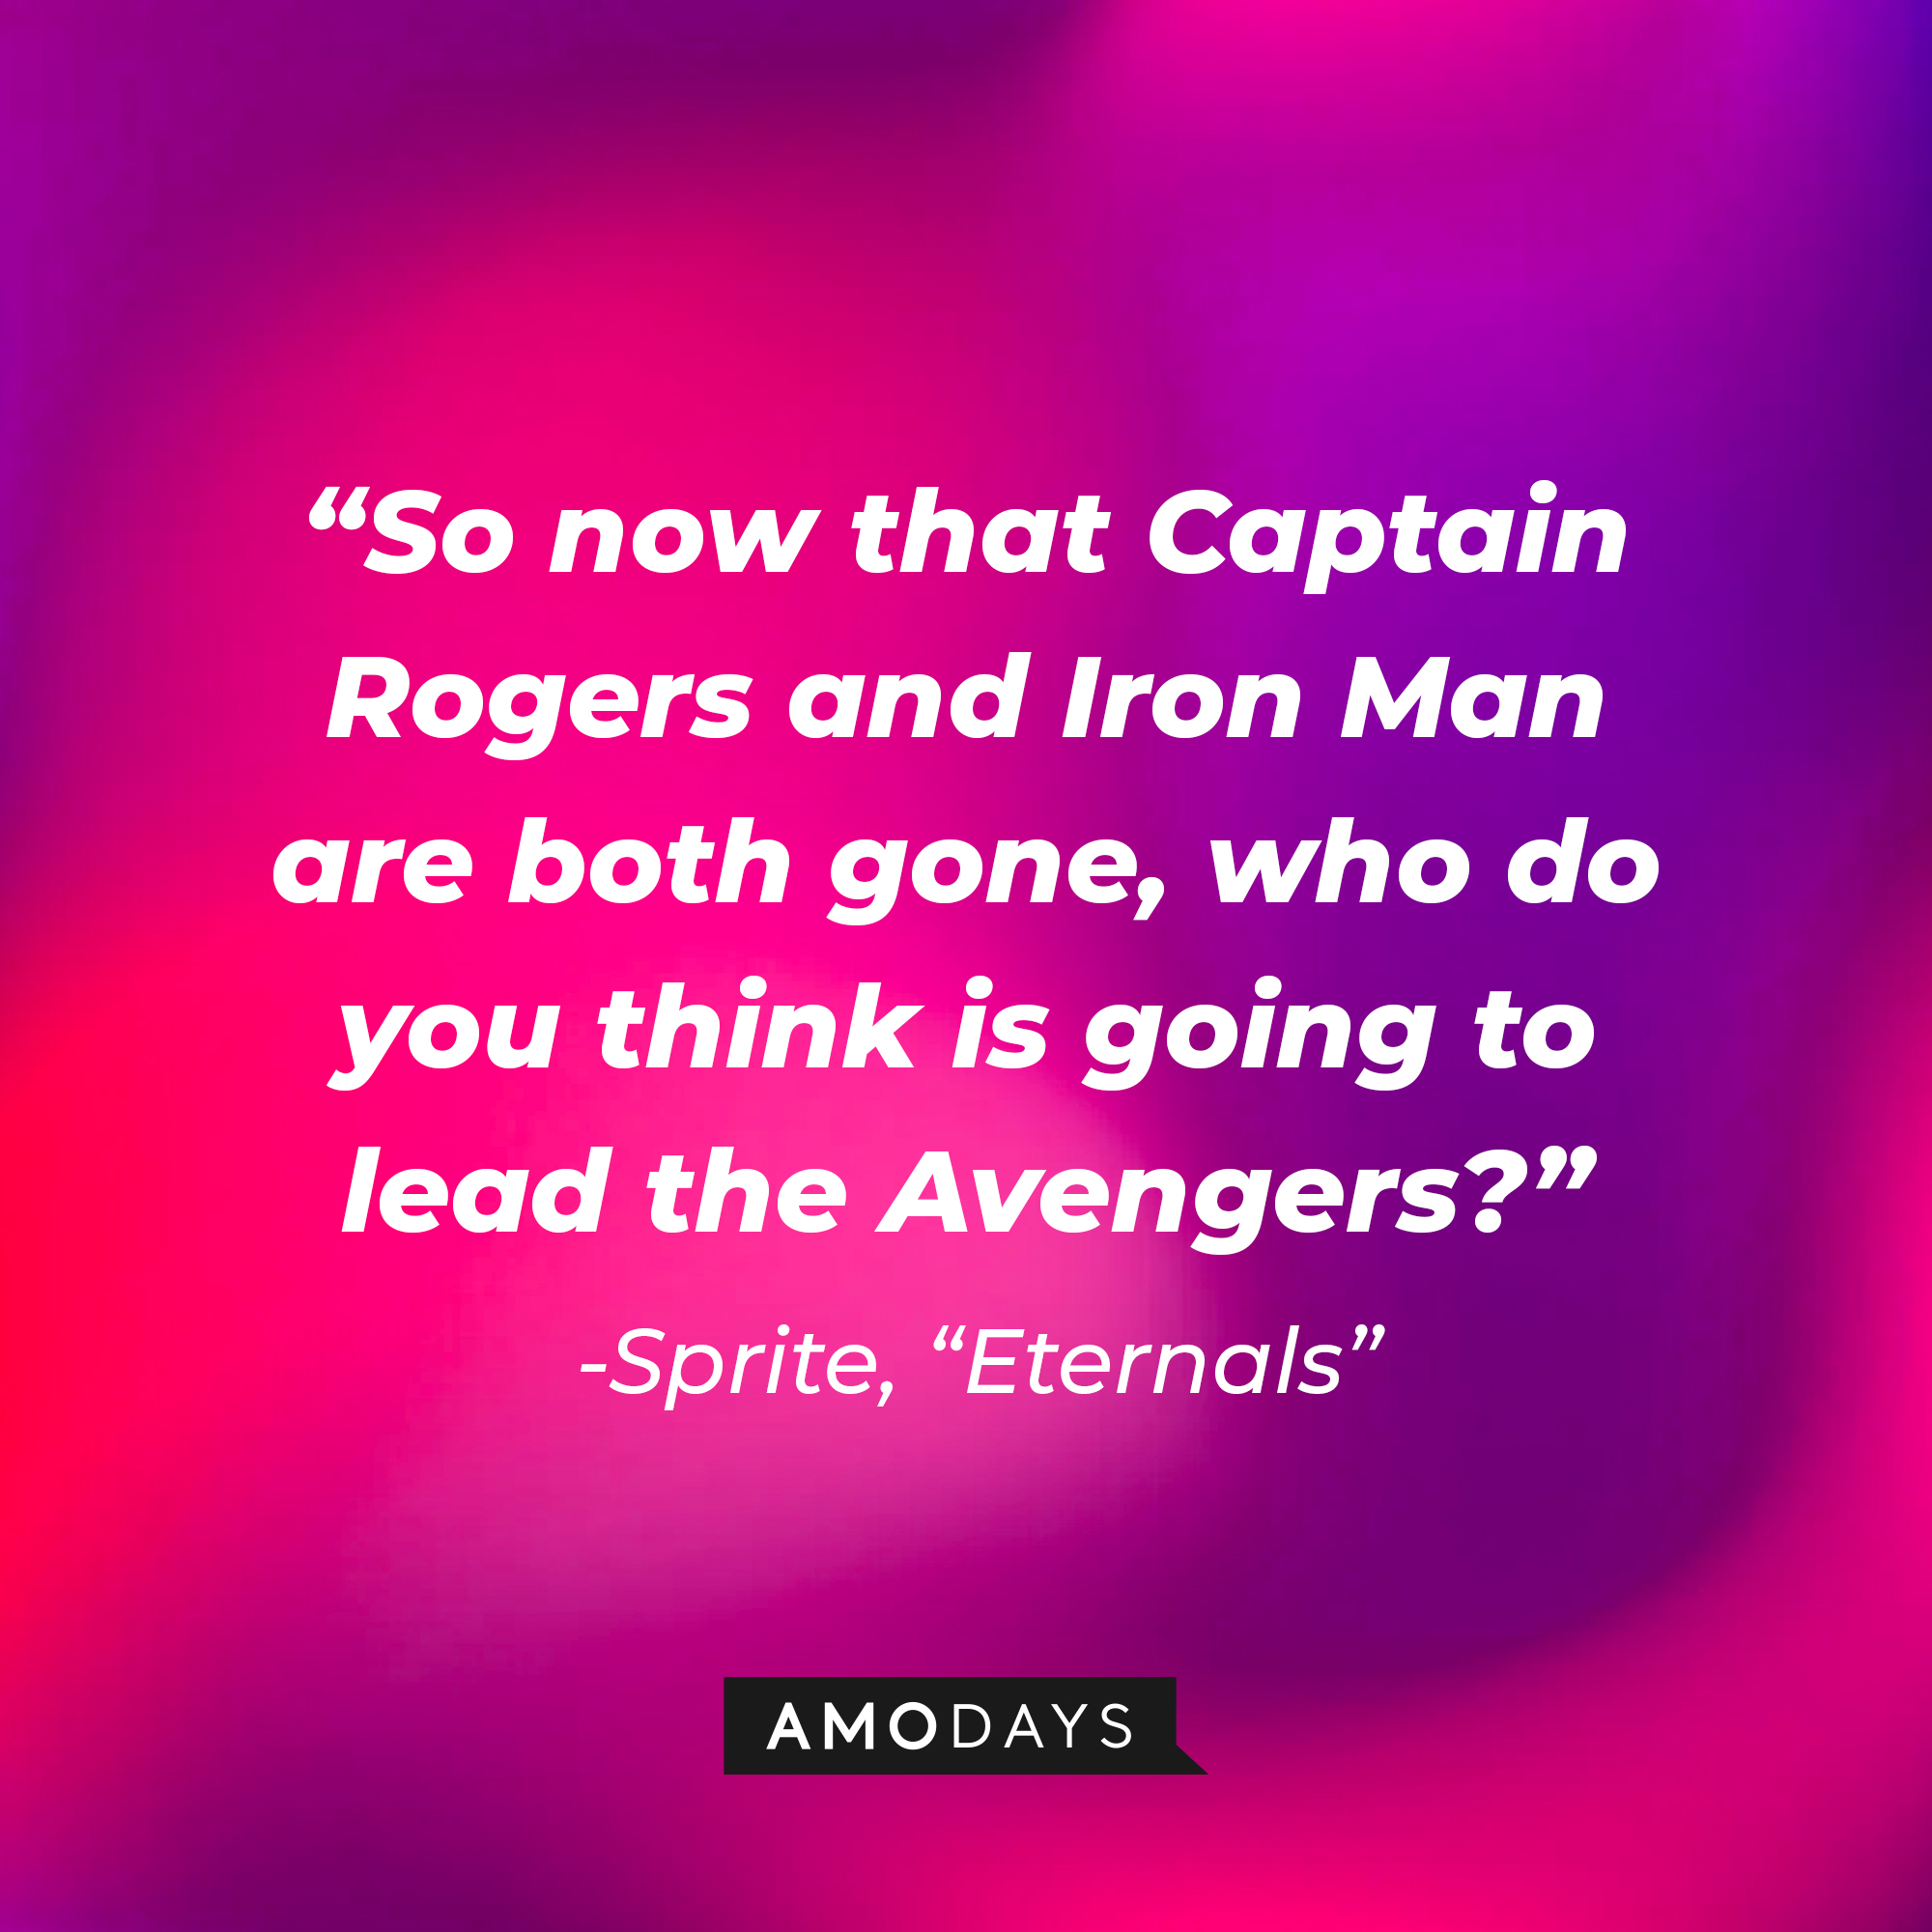 Sprite’s quote: "So now that Captain Rogers and Iron Man are both gone, who do you think is going to lead the Avengers?" | Image: AmoDays